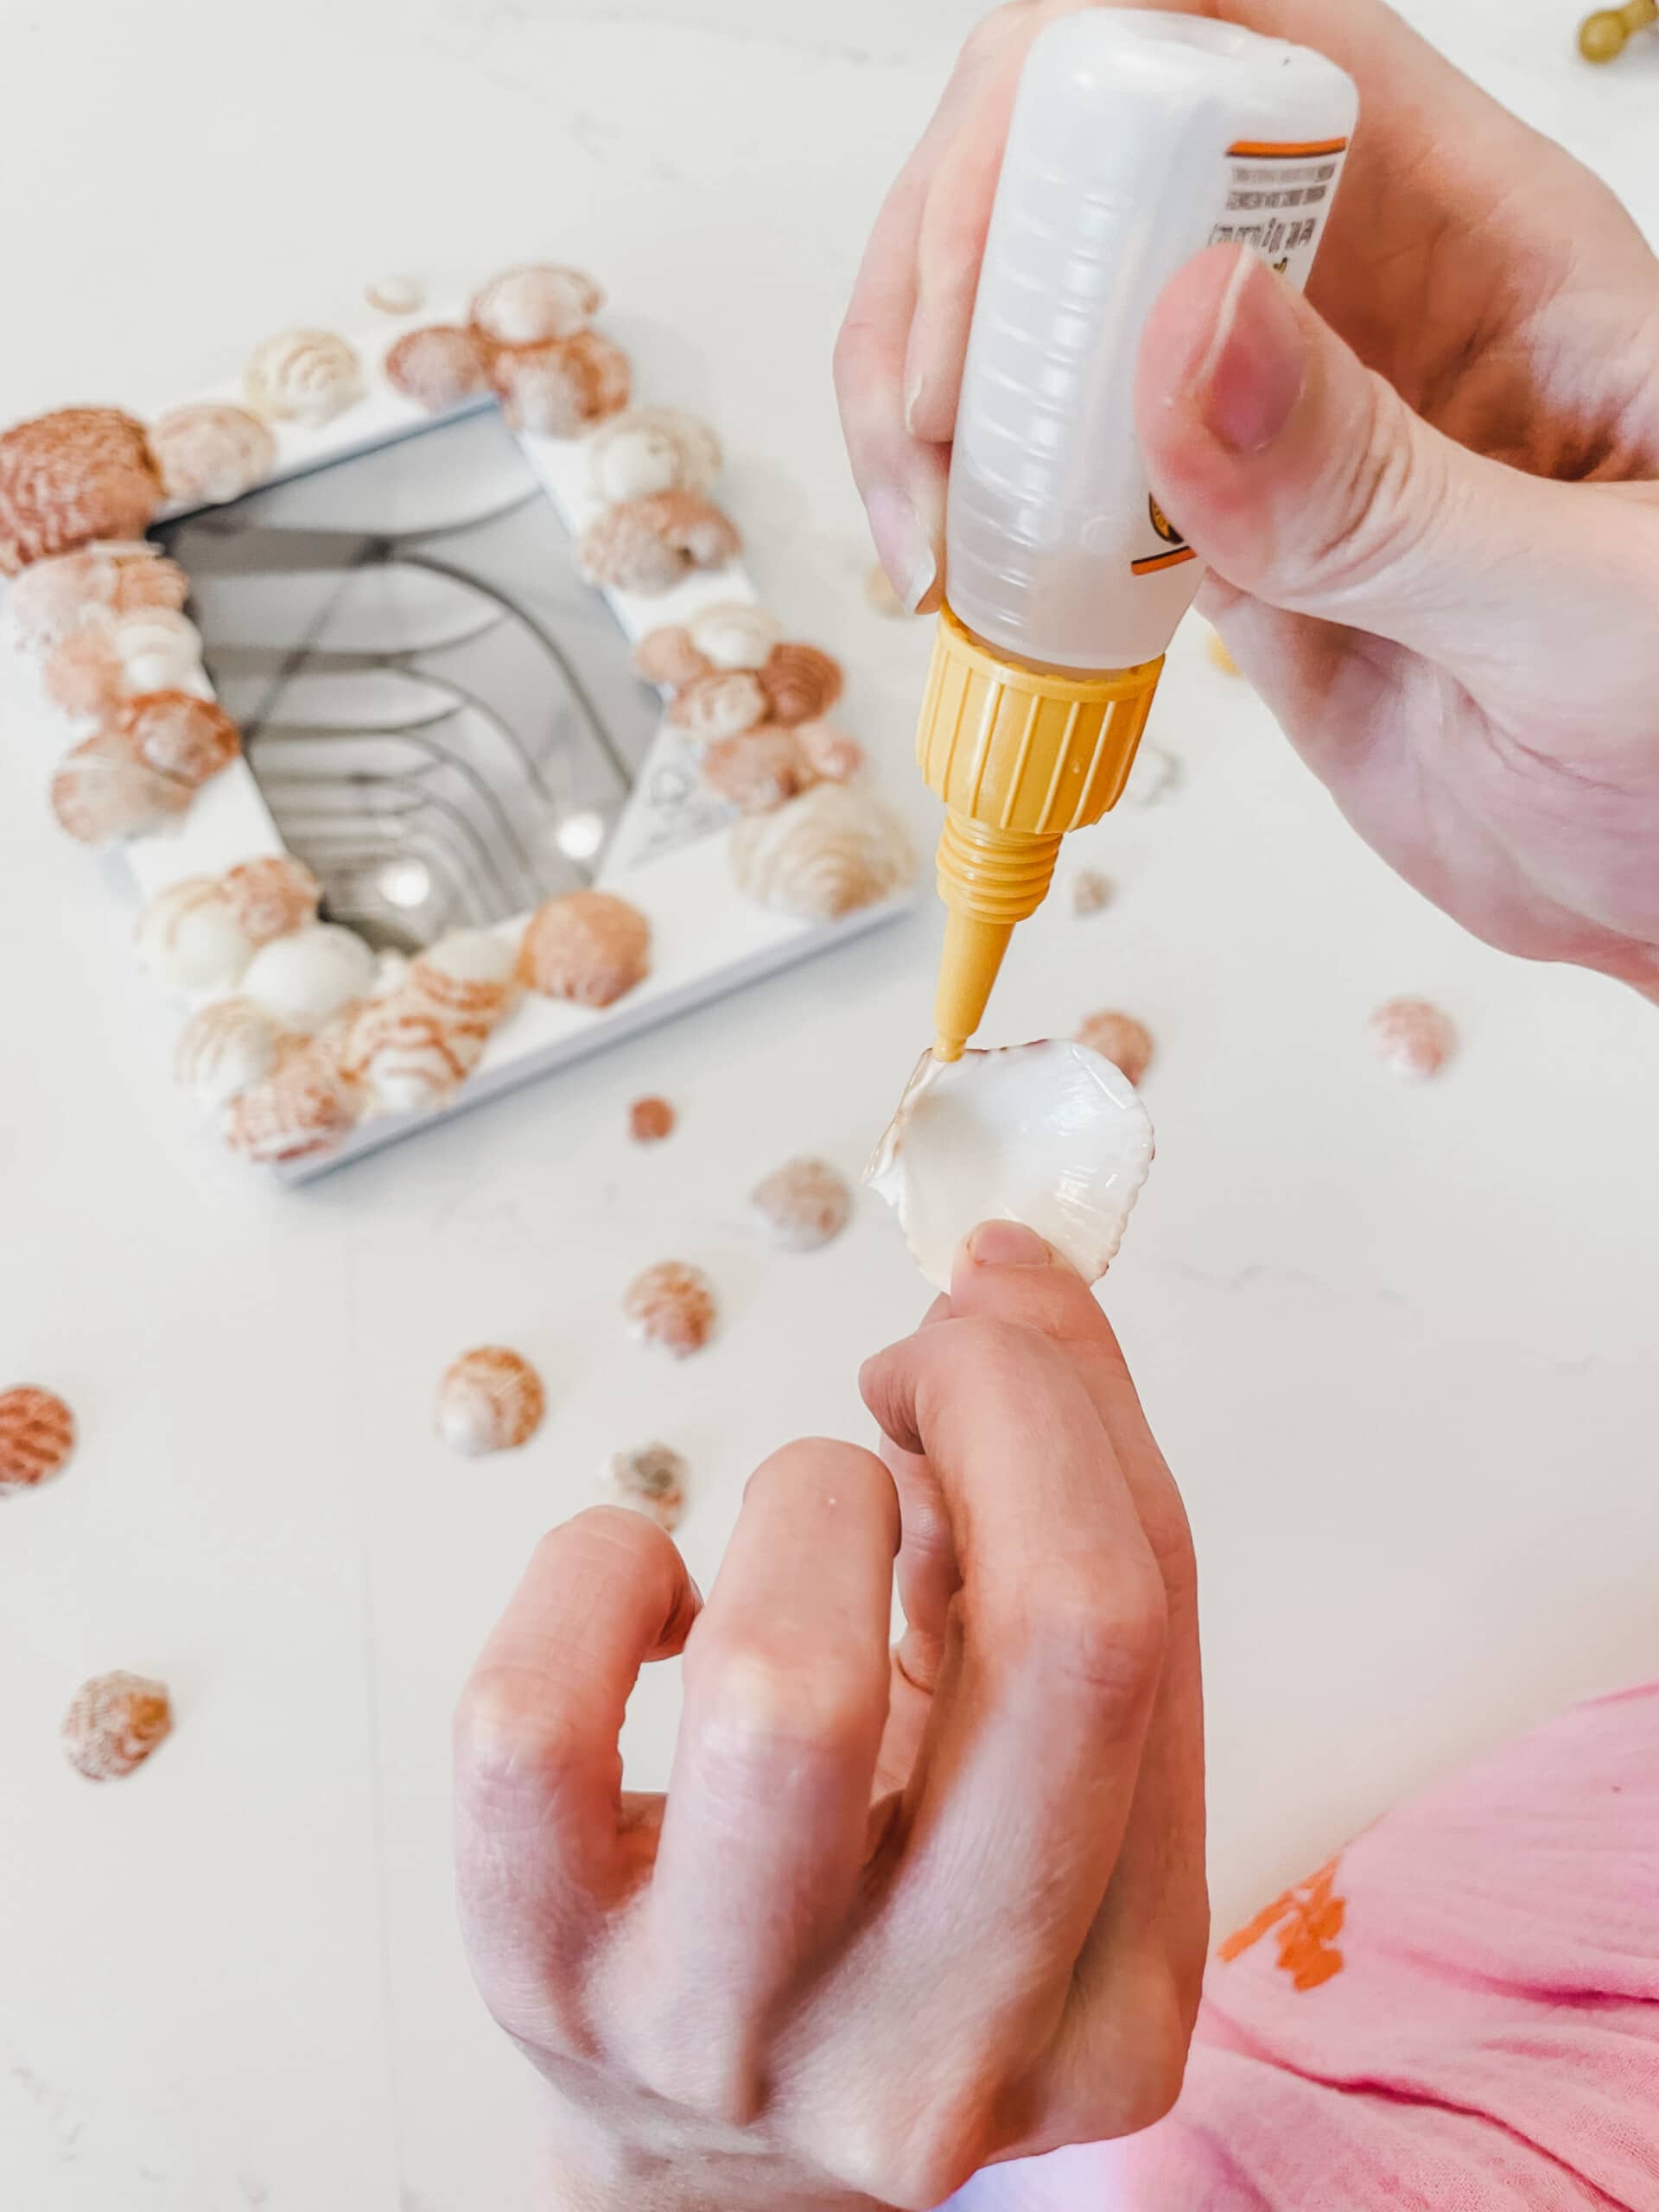 Woman's hands adding glue on edges of a seashell.